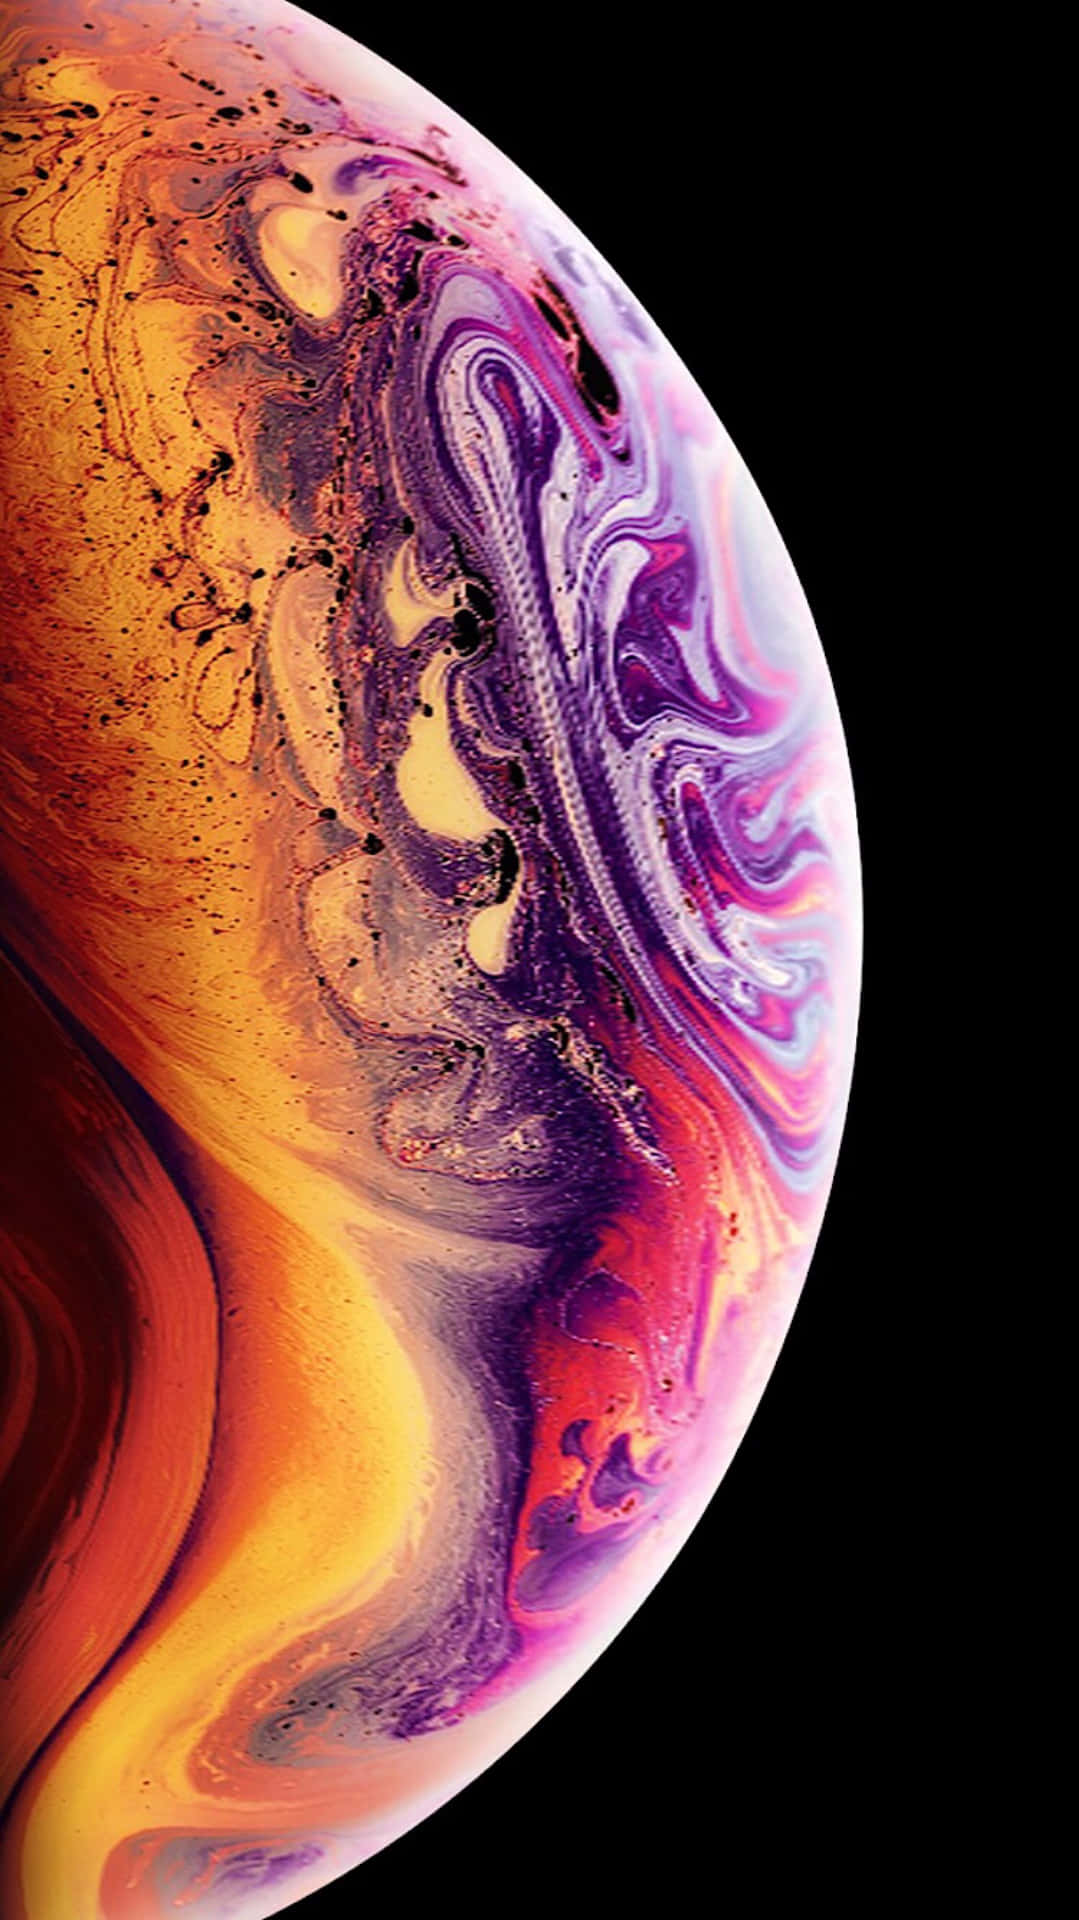 The latest and best phone - the High Quality Phone Wallpaper